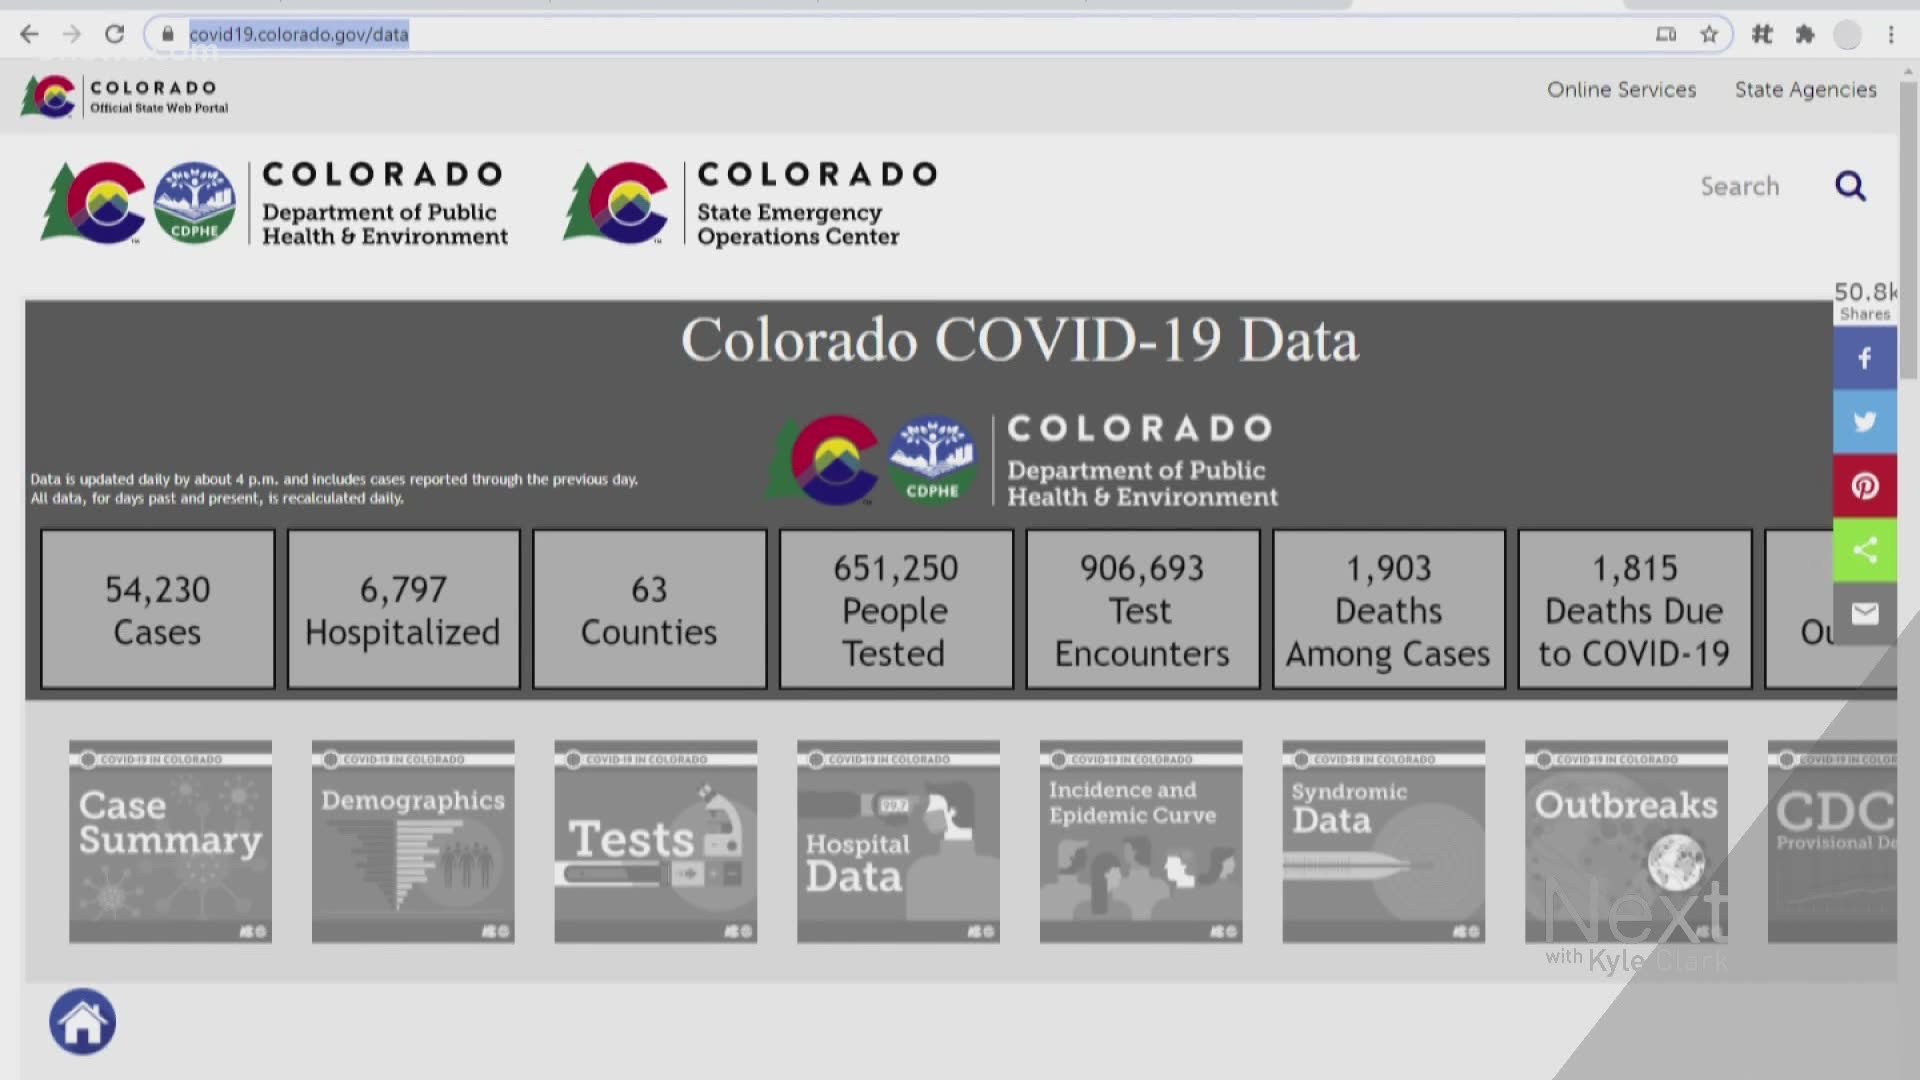 Colorado has rolled out a new system for publicly sharing data about COVID-19 in the state.